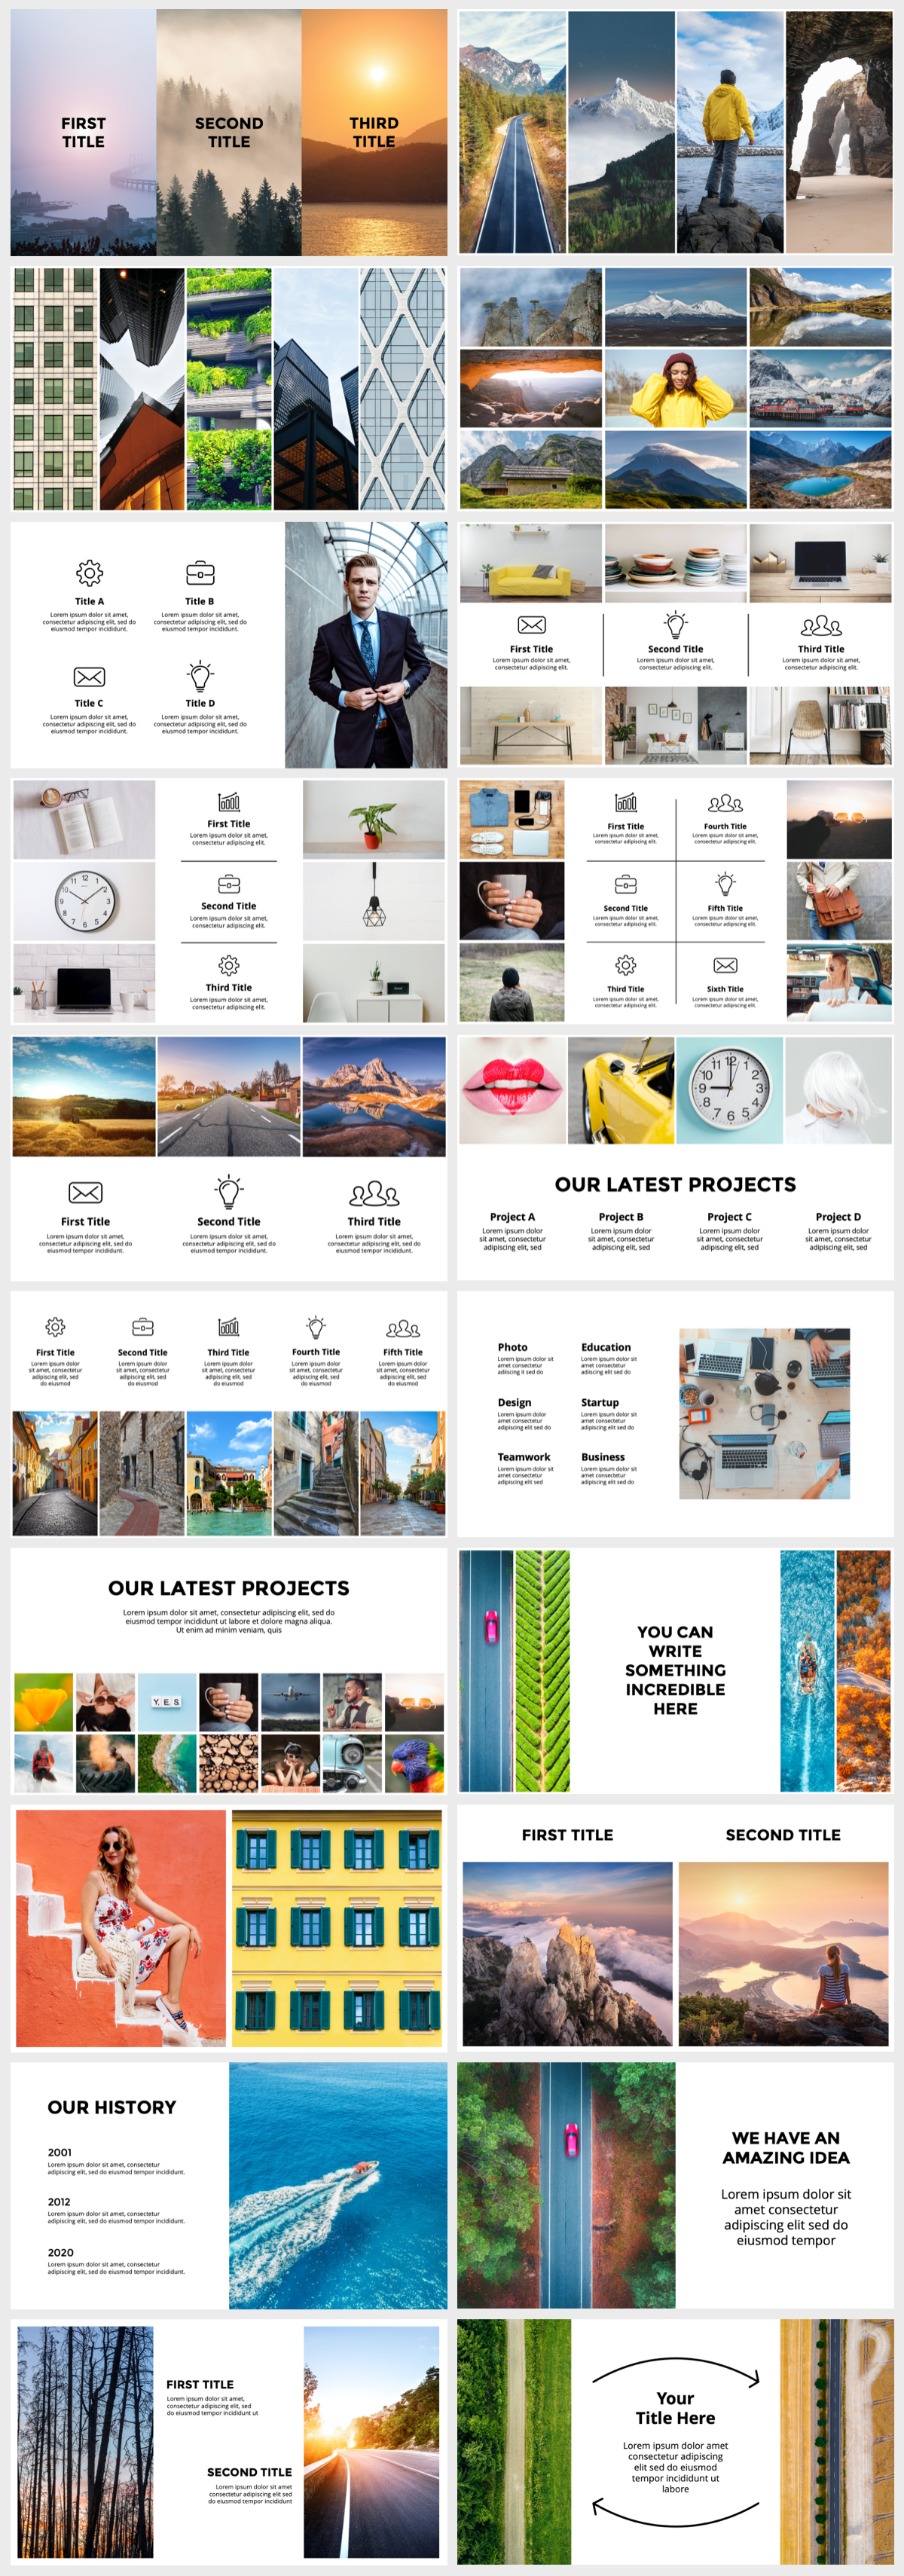 Wowly - 3500 Infographics & Presentation Templates! Updated! PowerPoint Canva Figma Sketch Ai Psd. - 237